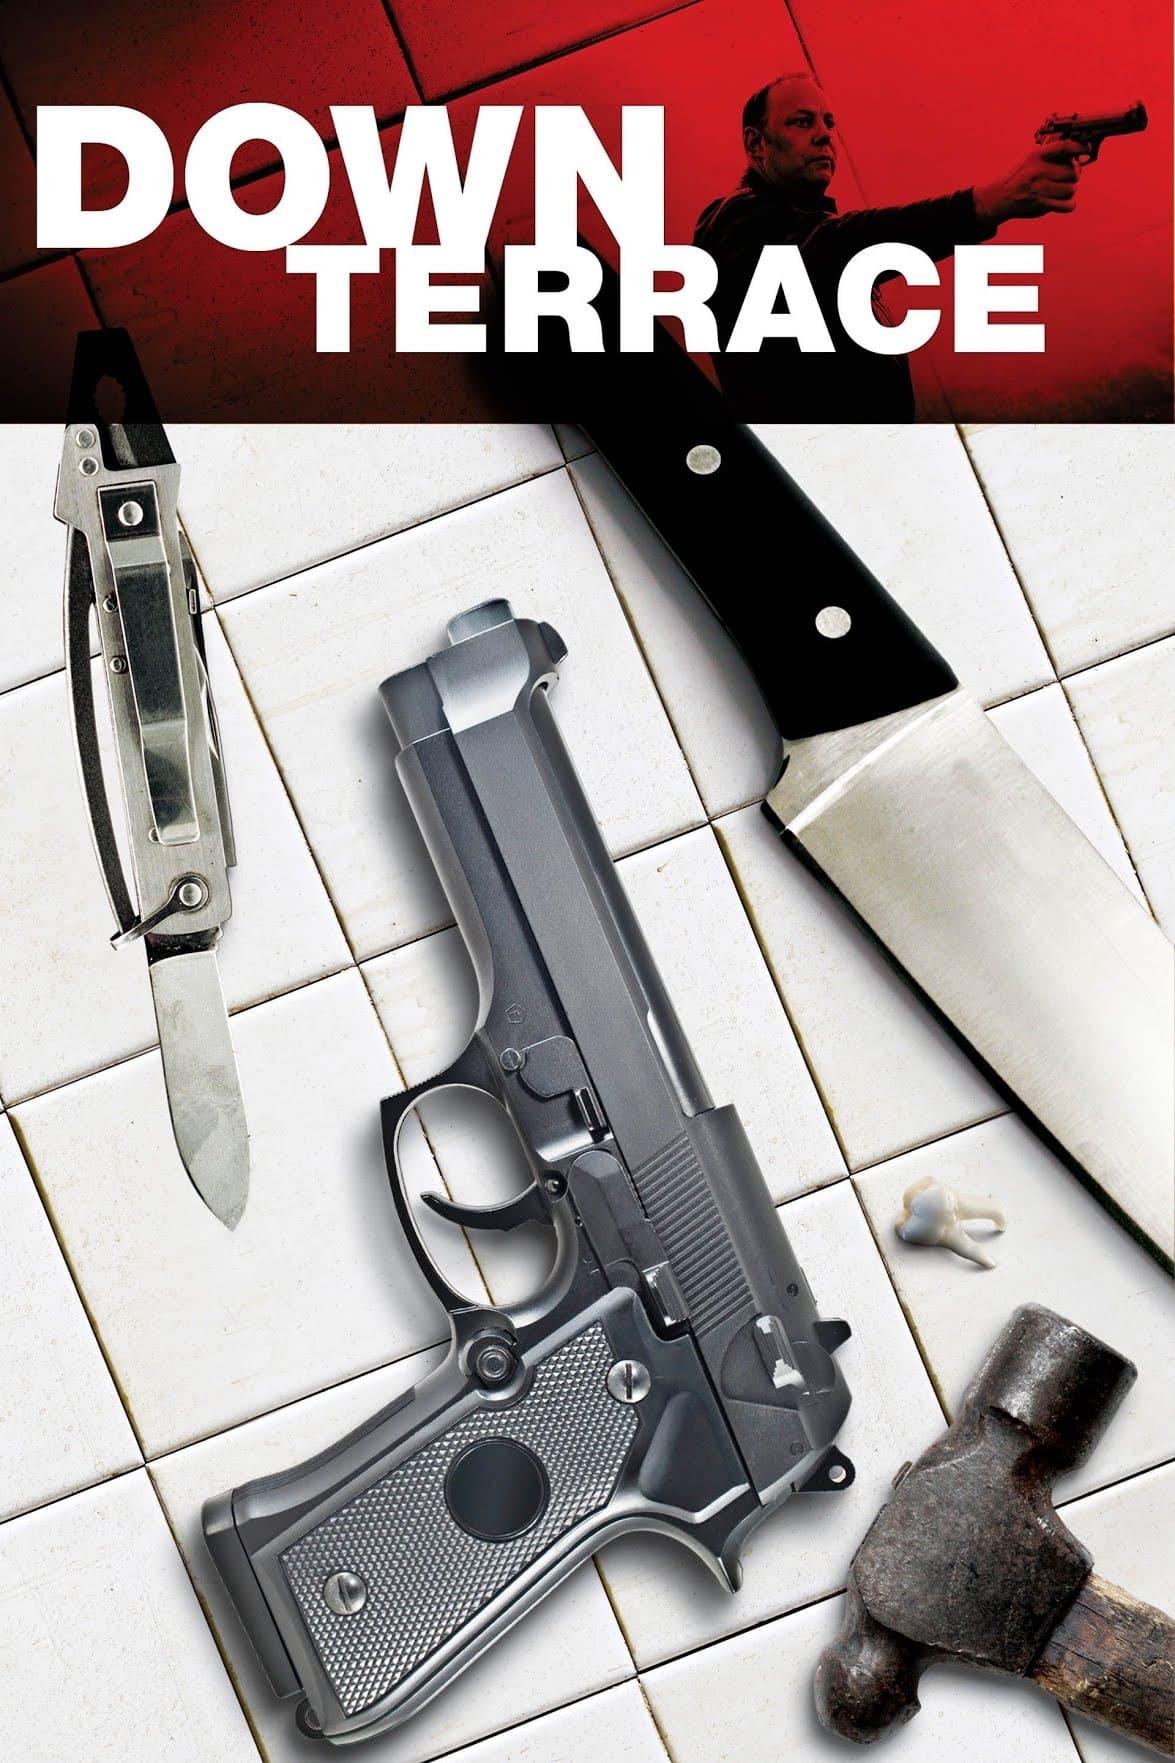 Down Terrace poster